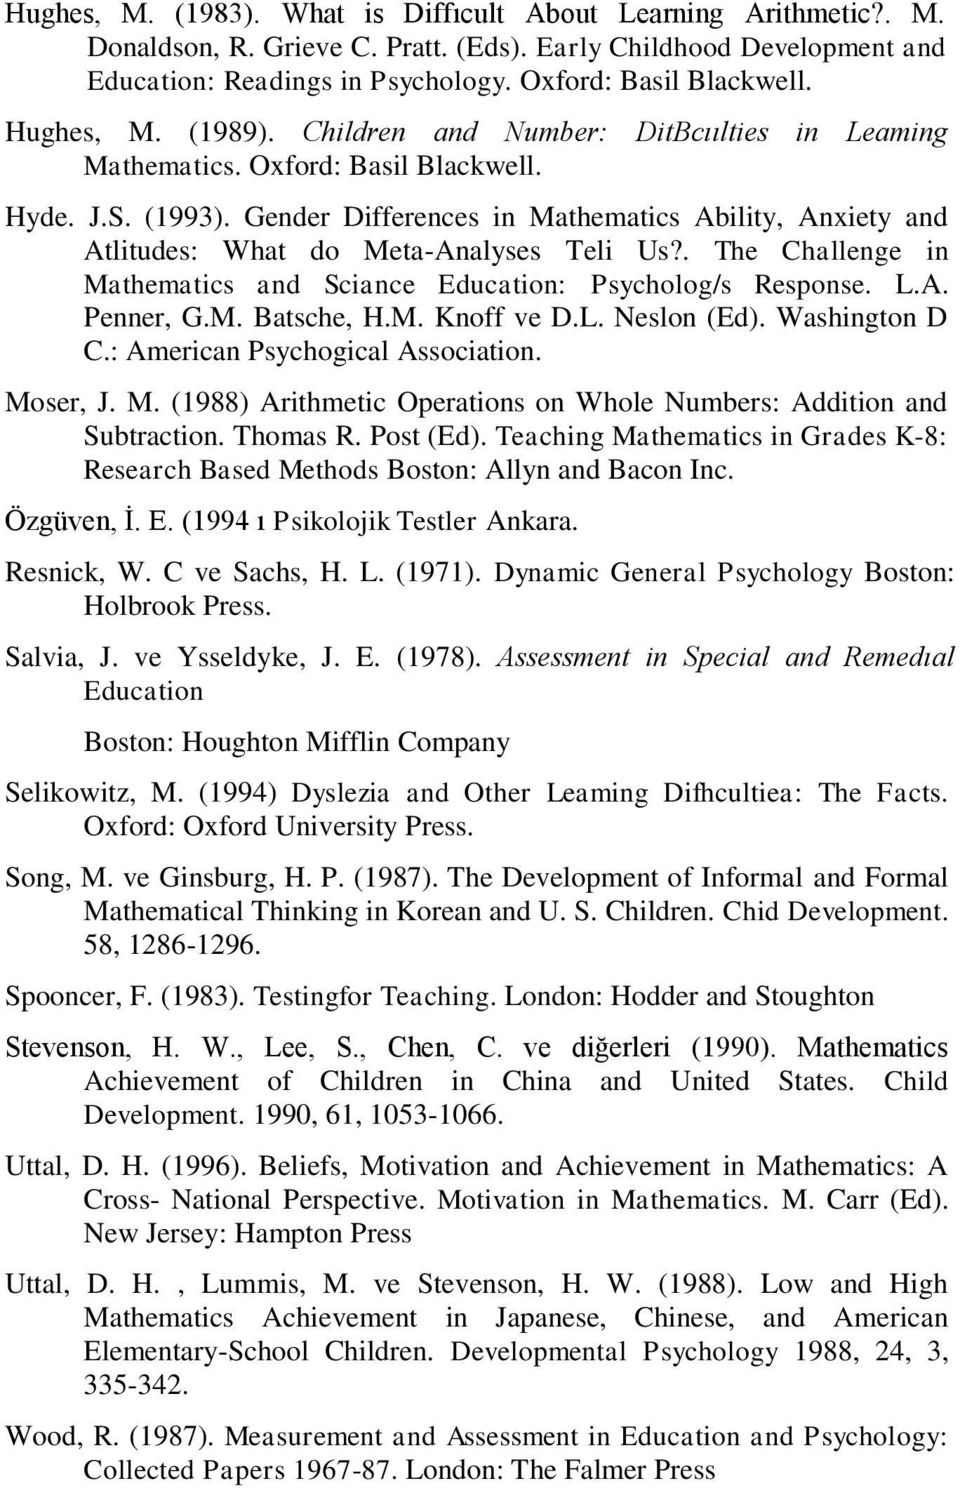 Gender Differences in Mathematics Ability, Anxiety and Atlitudes: What do Meta-Analyses Teli Us?. The Challenge in Mathematics and Sciance Education: Psycholog/s Response. L.A. Penner, G.M. Batsche, H.